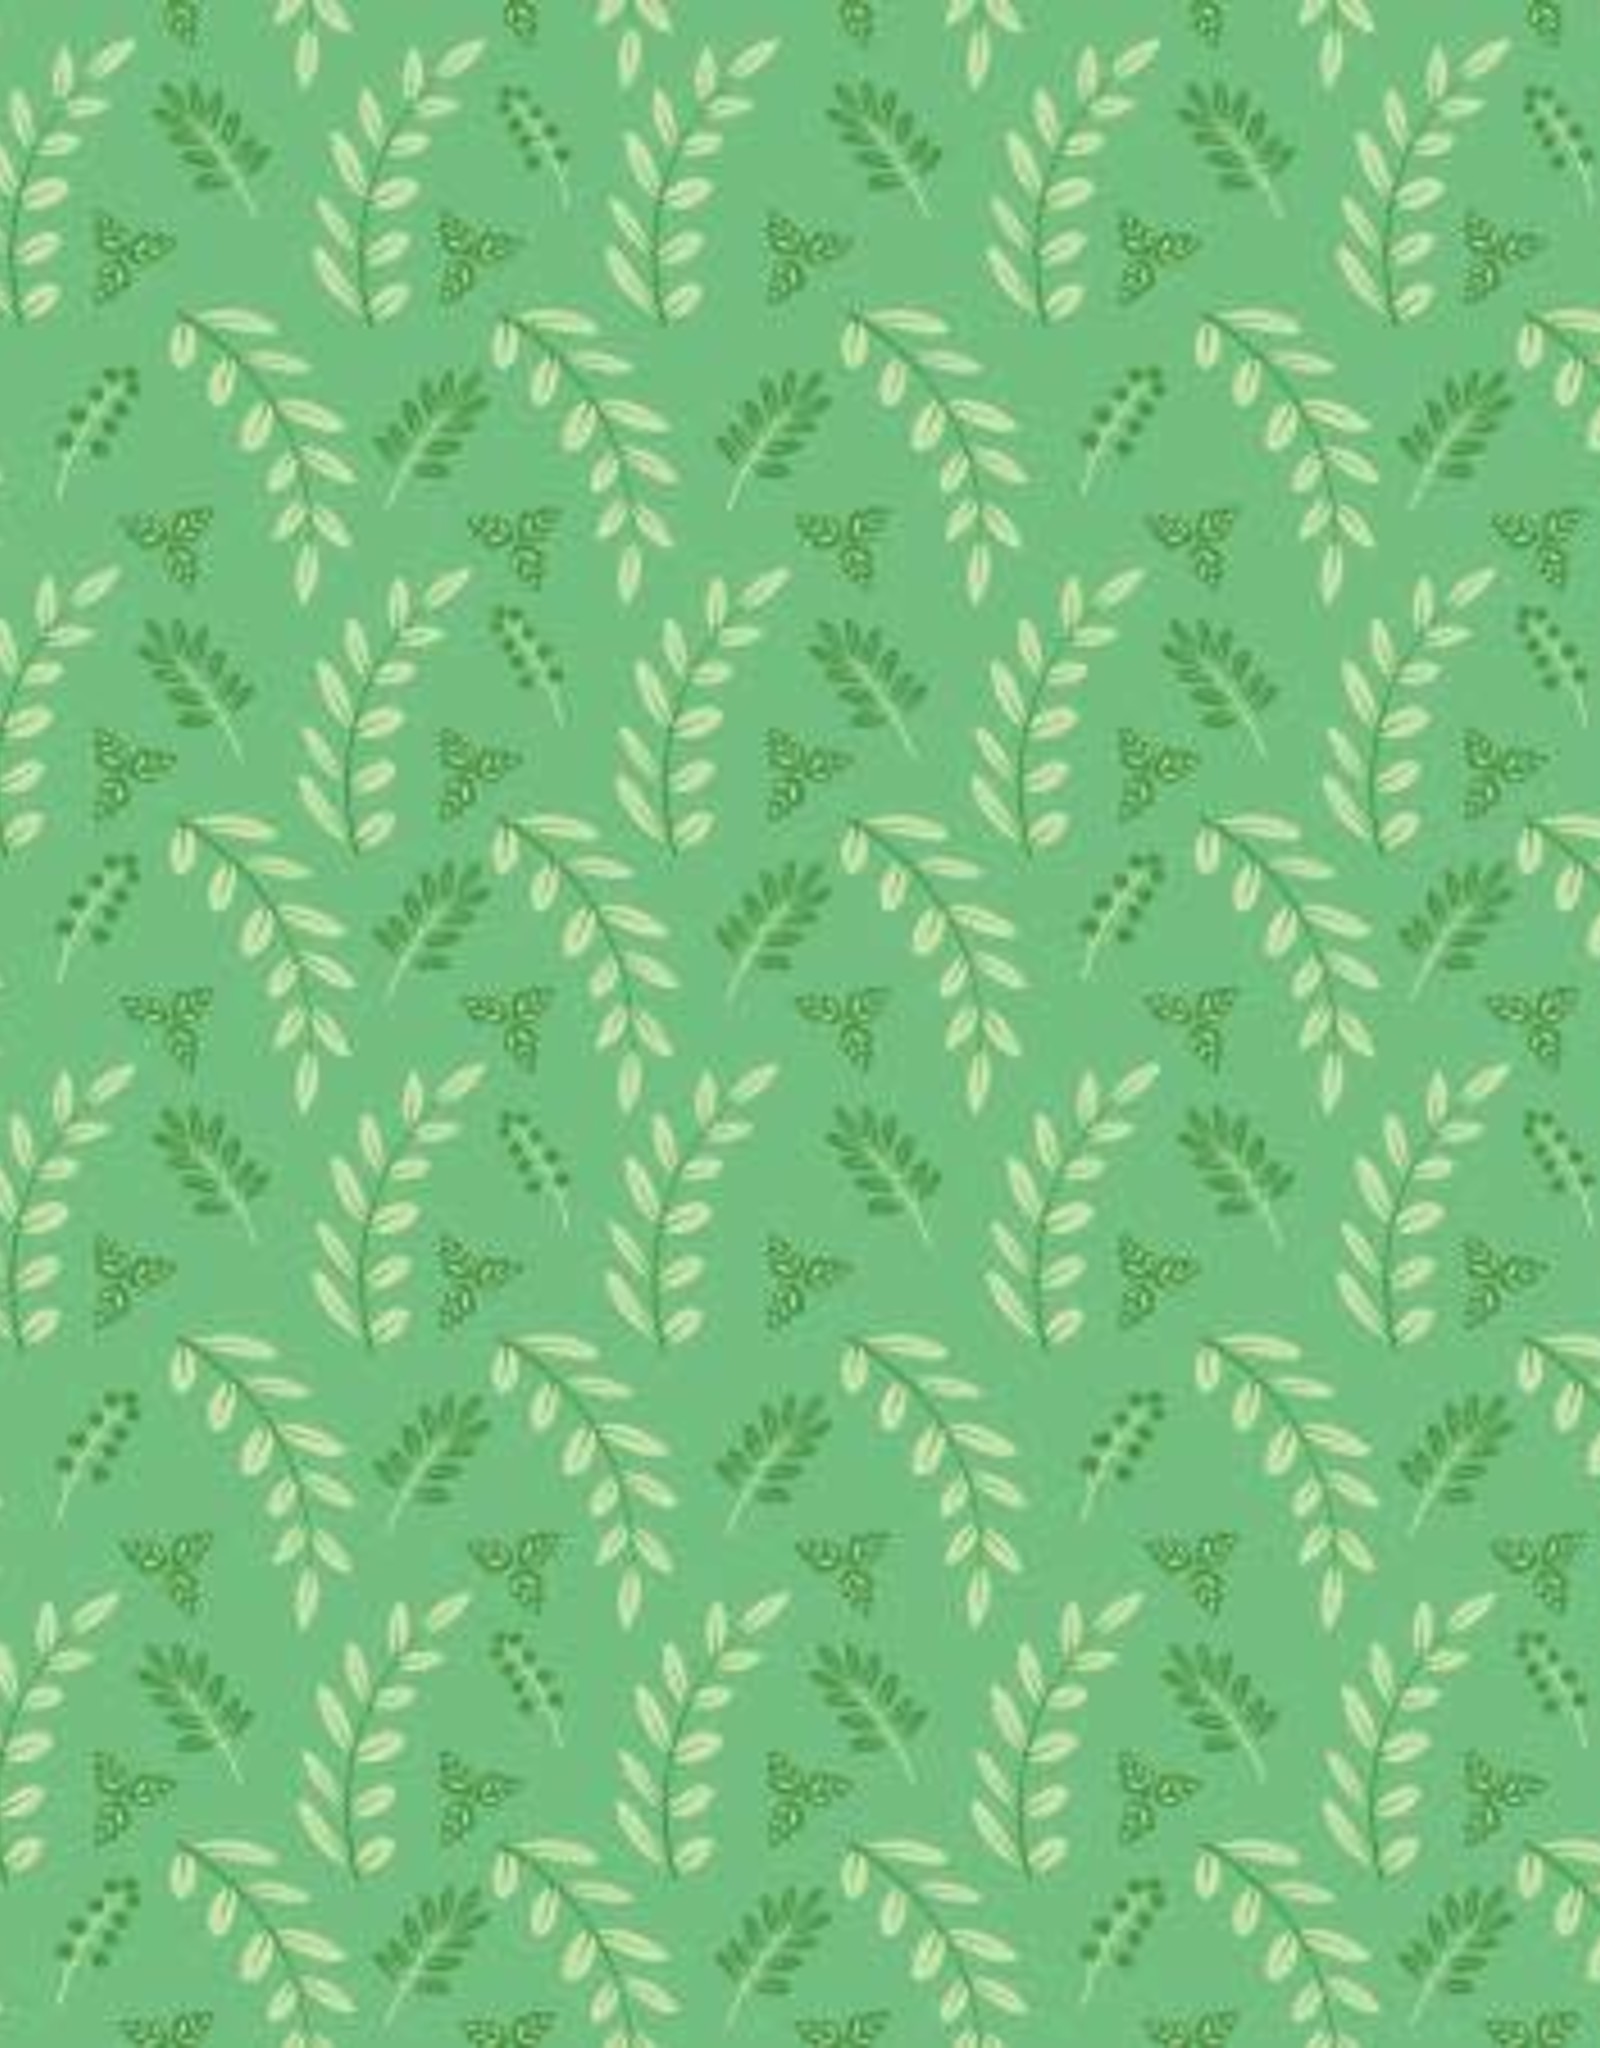 Poppy and Posey leaves green (1/2m) C10585R-GREEN